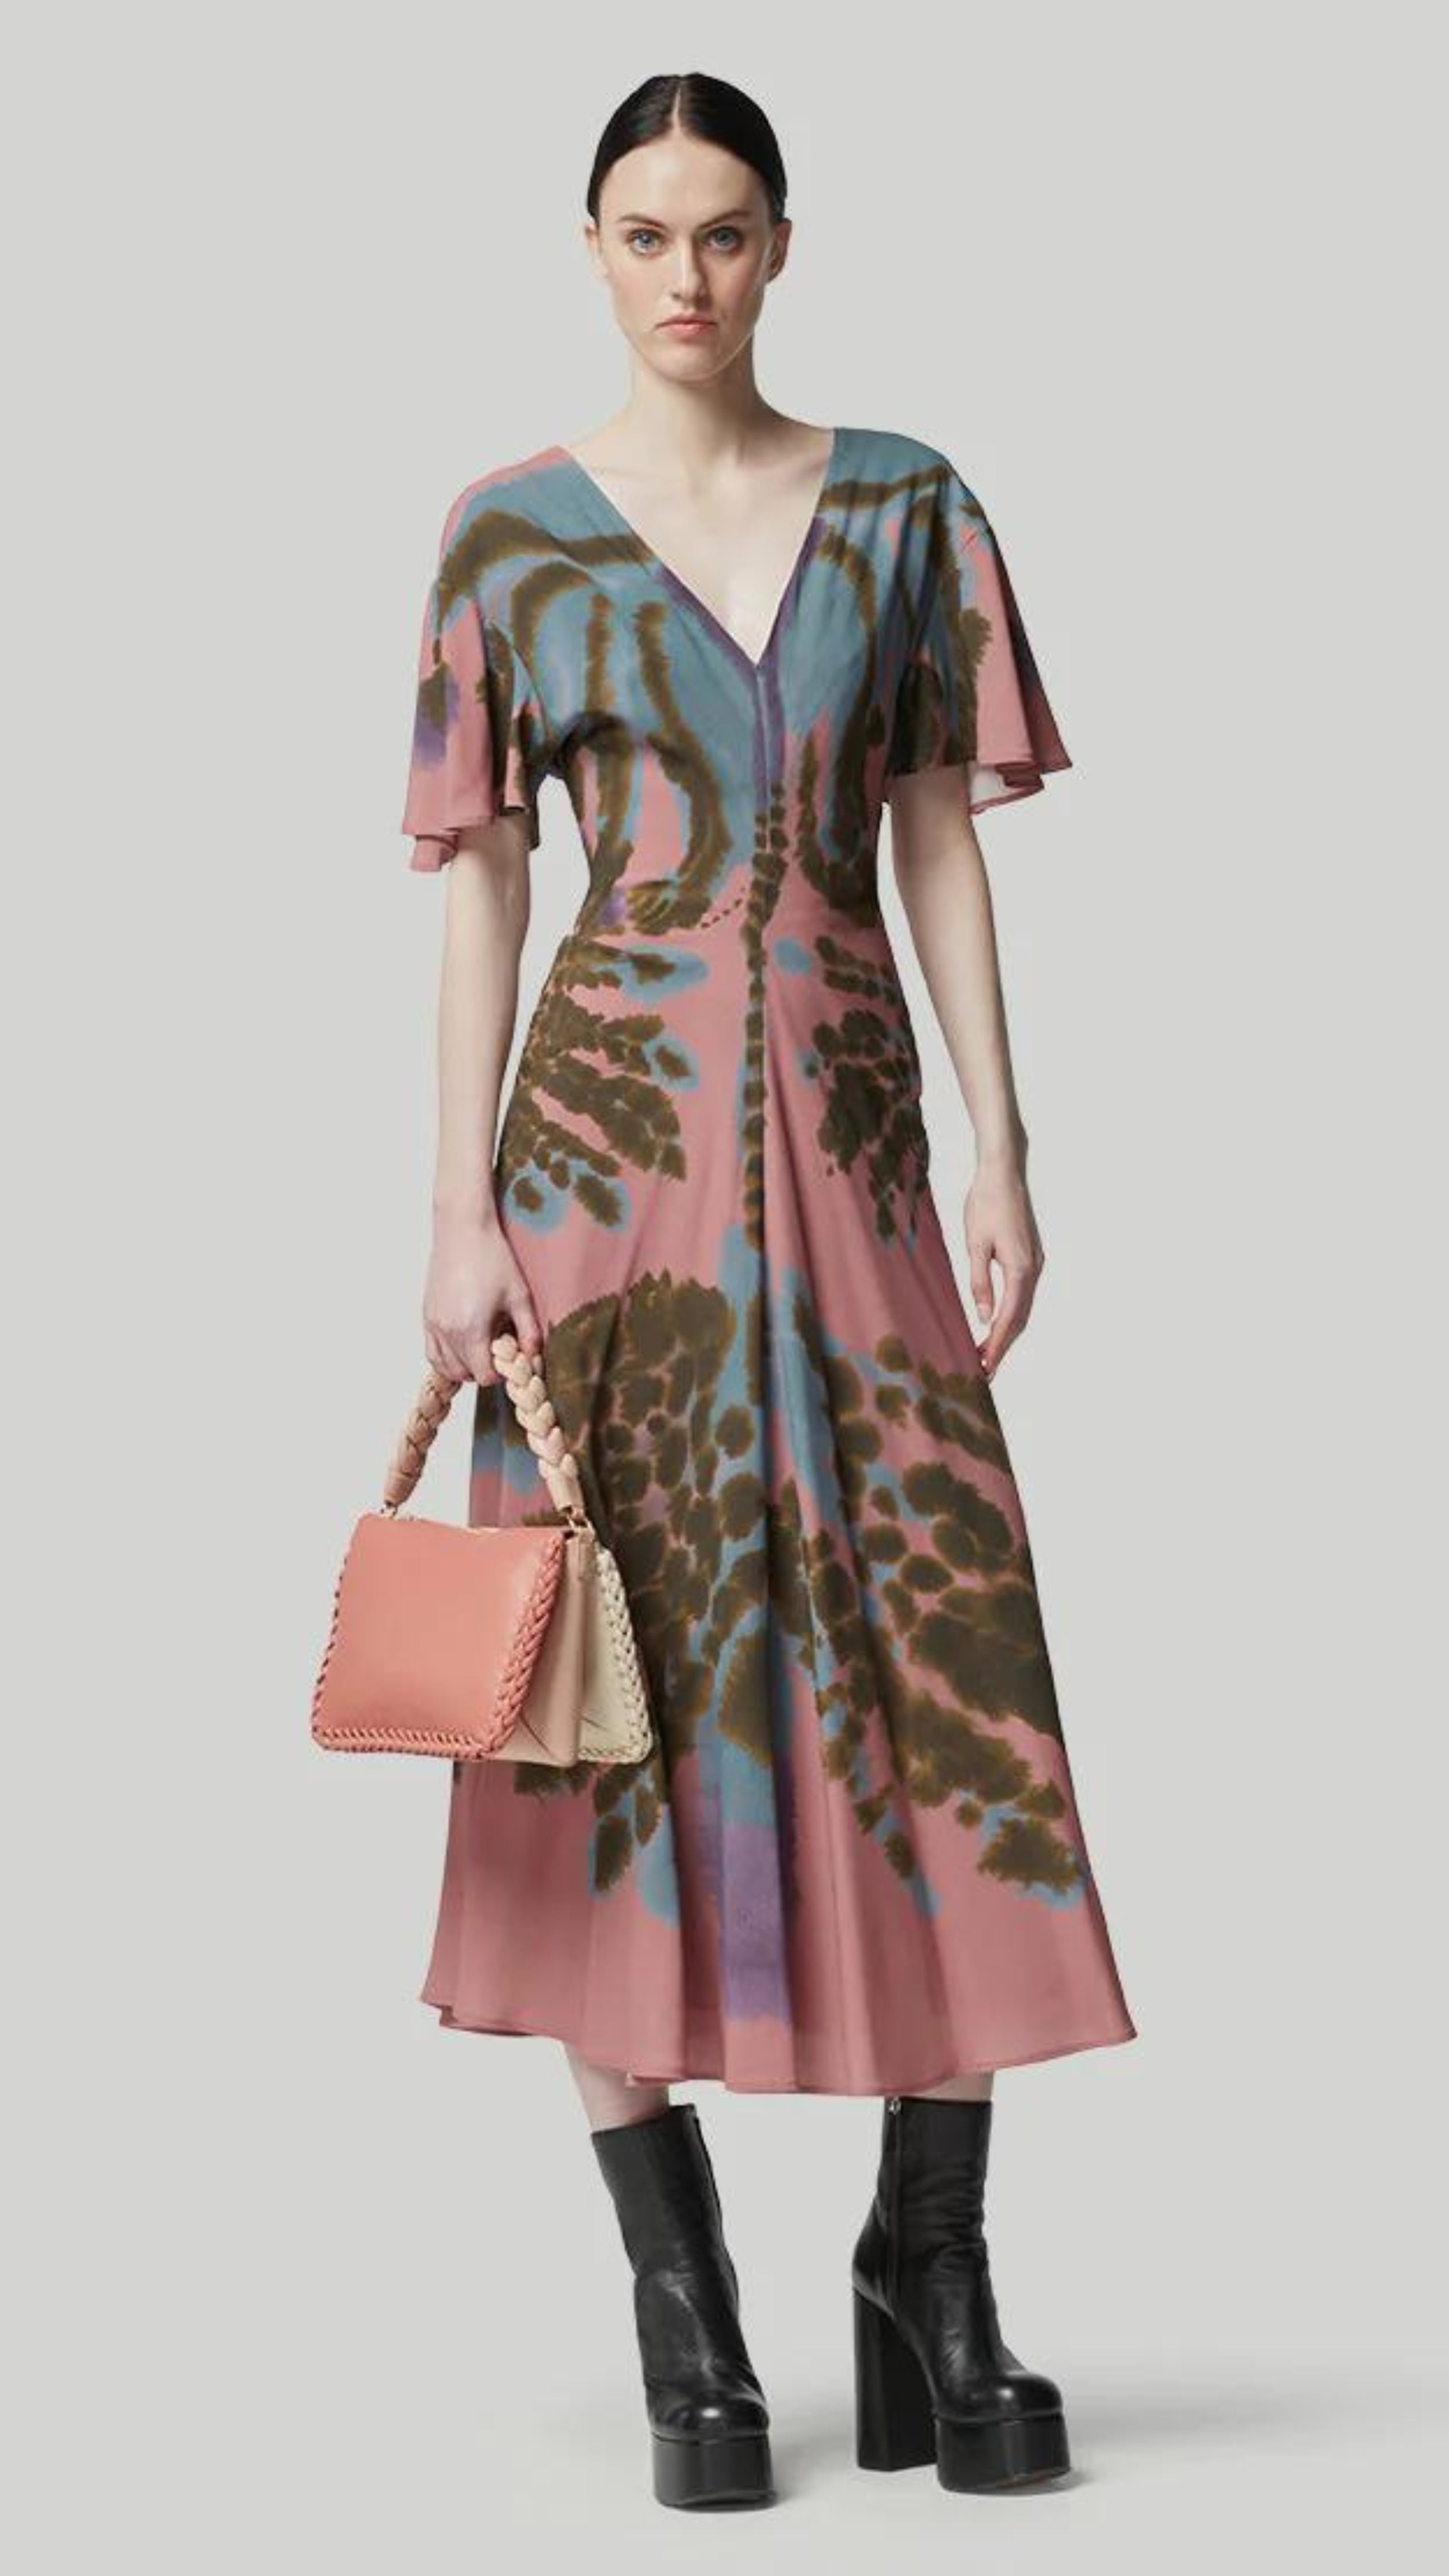 Altuzarra Pelopenese Dress. Rose pink, sky blue and green rorschach pattern midi dress. With a v neckline and soft draping half sleeves. Flowing skirt with waist line rouching. Shown on the model facing foreward.